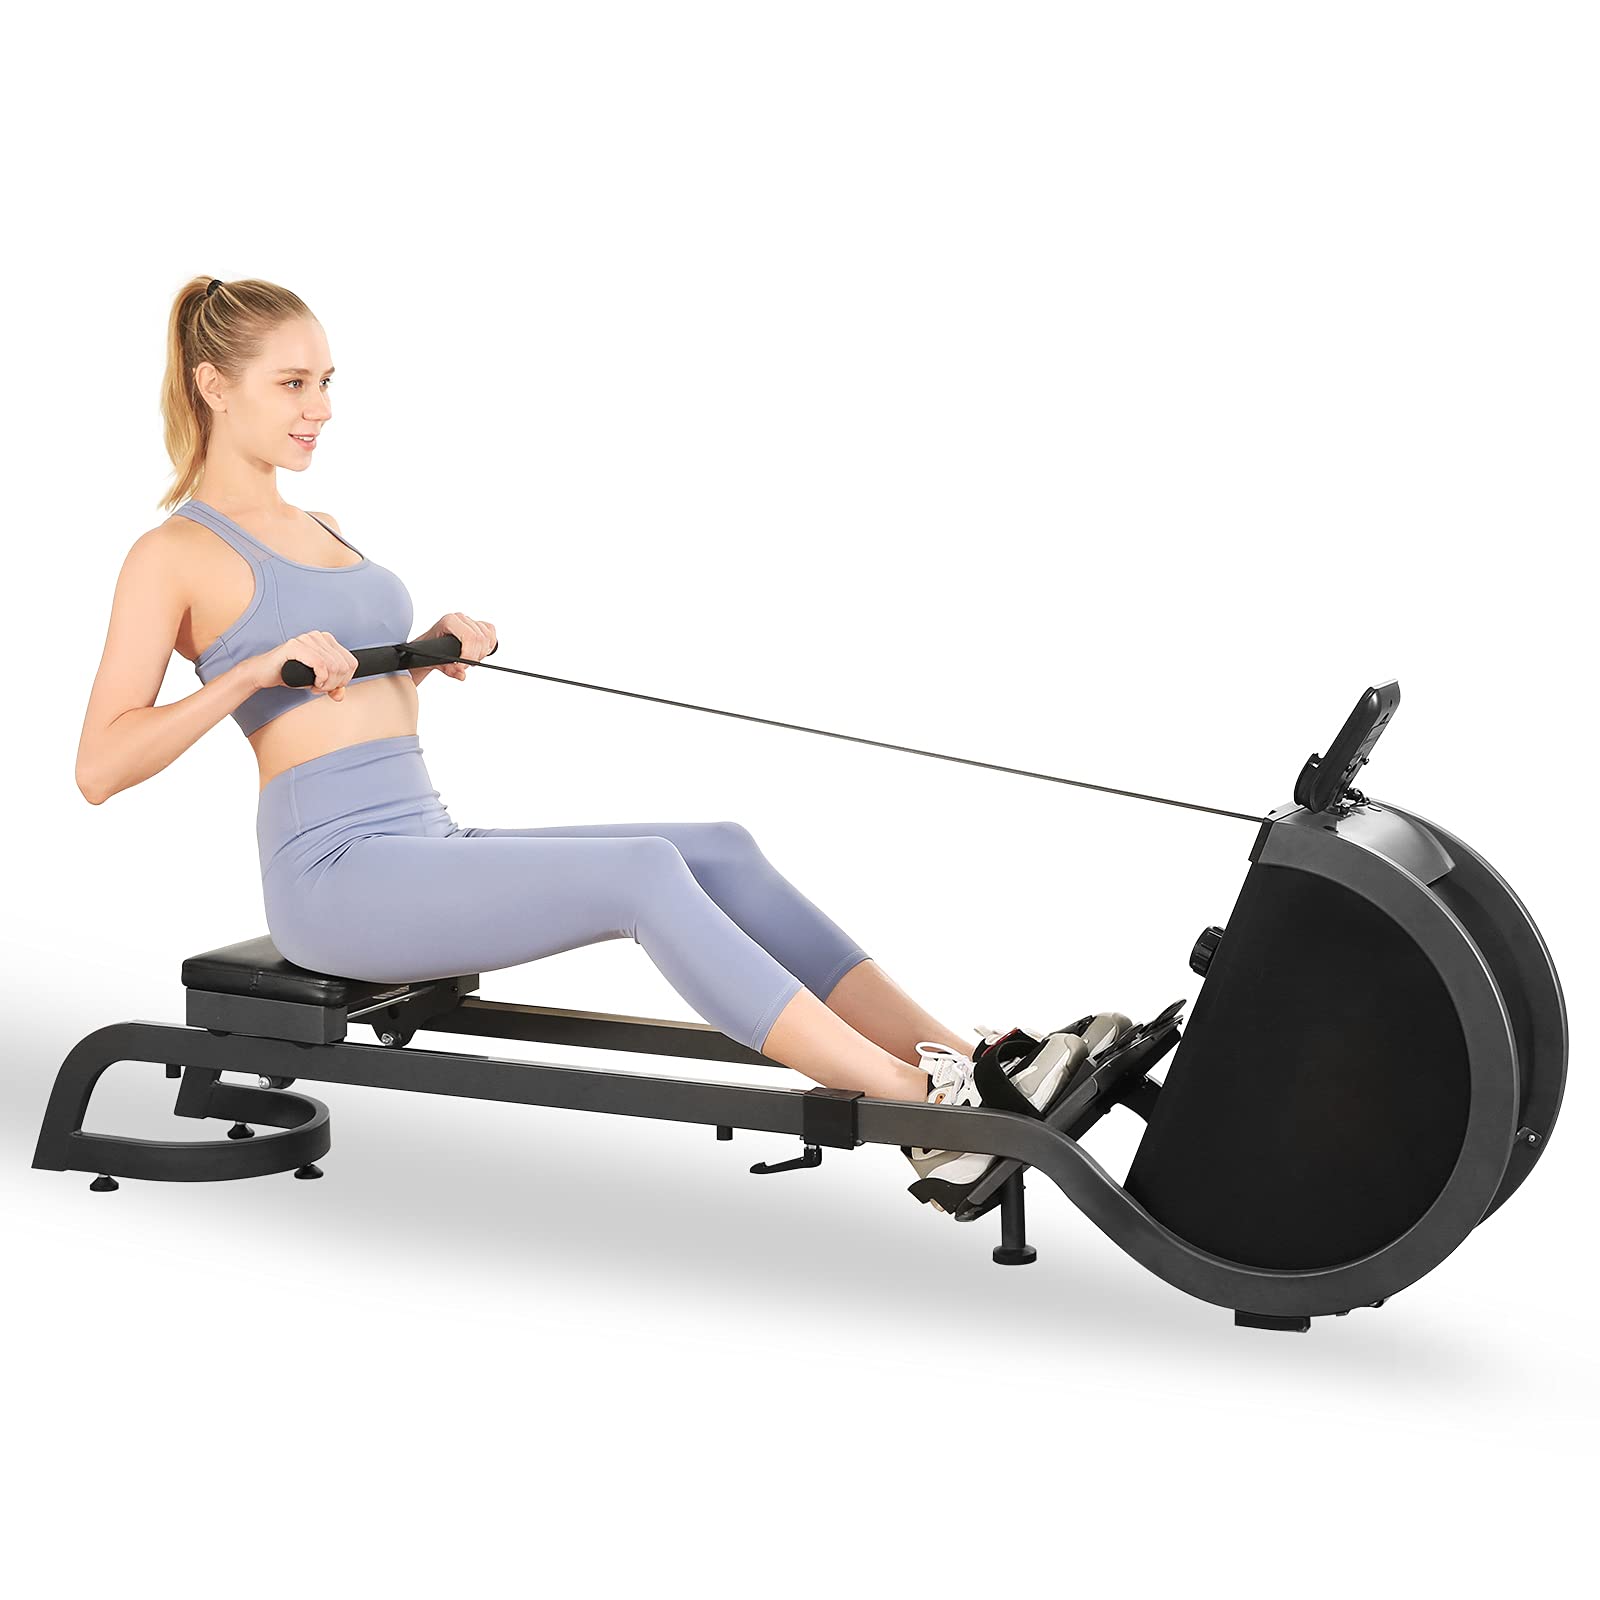 Load image into Gallery viewer, Magnetic Rowing Machine with LCD Display, Double Track Rower Machine 16 Levels Adjustable Resistance for Home Cardio Exercise Training Fitness Equipment, 250 lbs Weight Capacity
